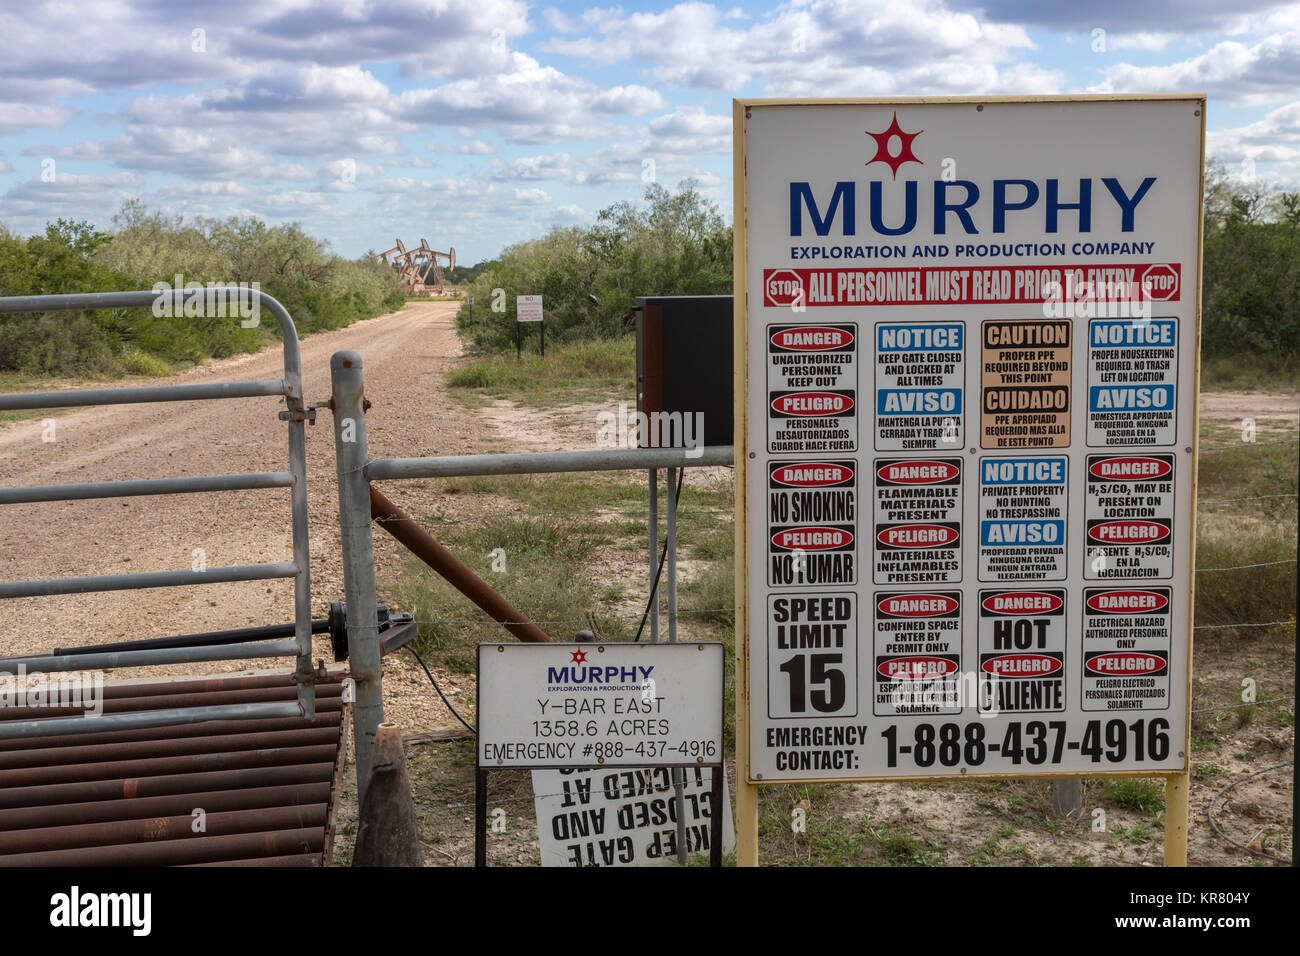 Fowlerton, Texas - A sign lists notices all personnel must read before entering an oil production site. Stock Photo